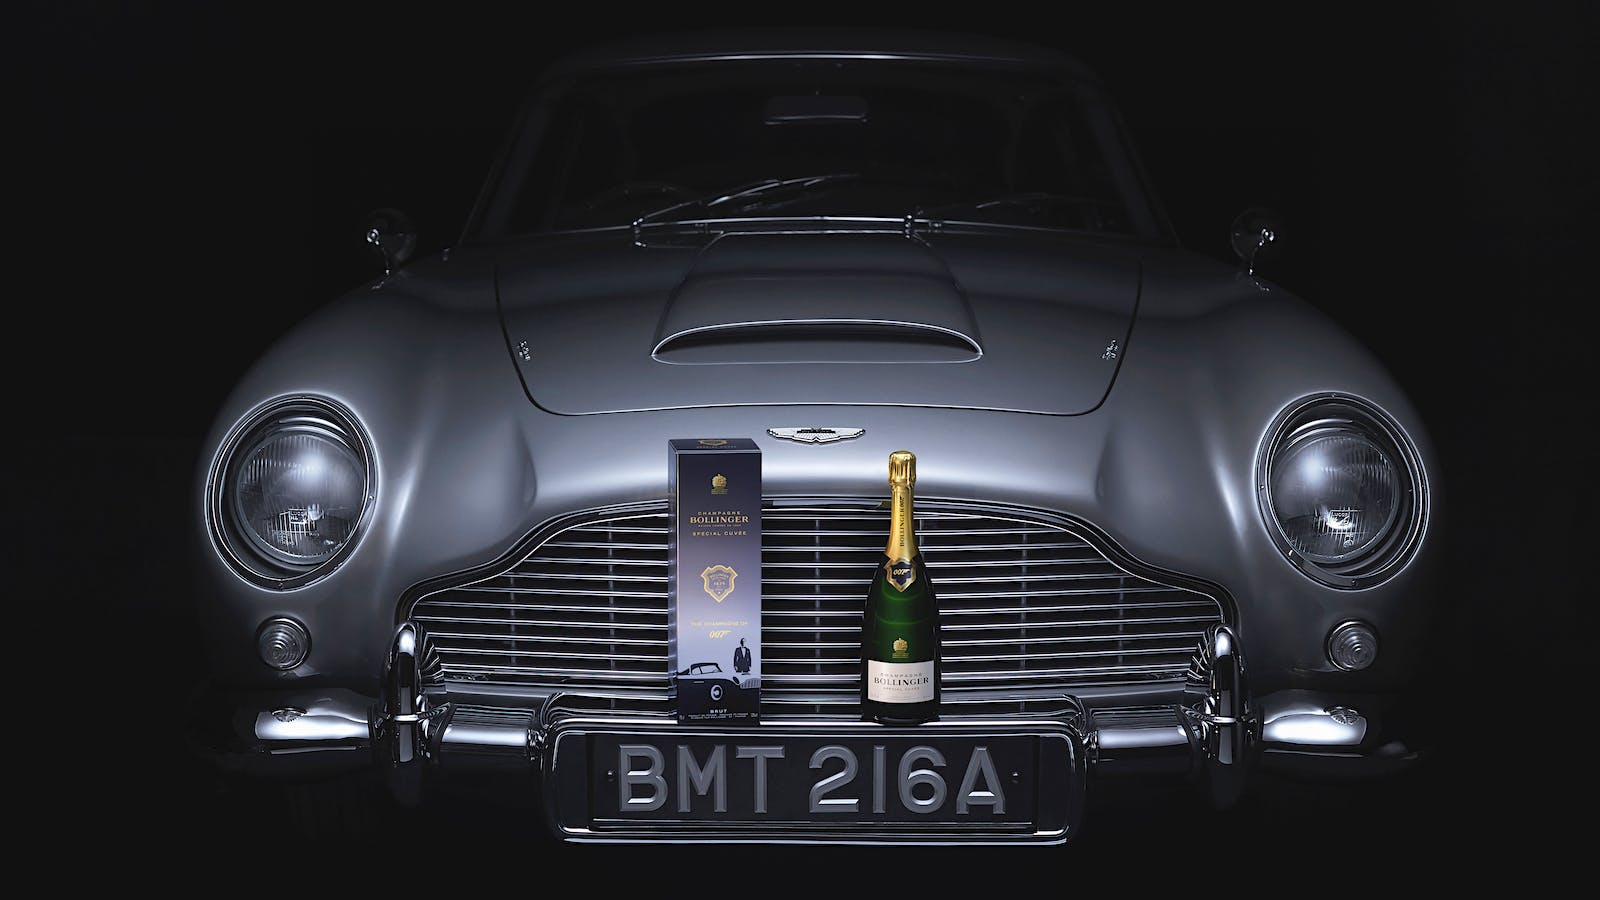 Bollinger's New 007 Champagne Honors Bond Film 'No Time to Die